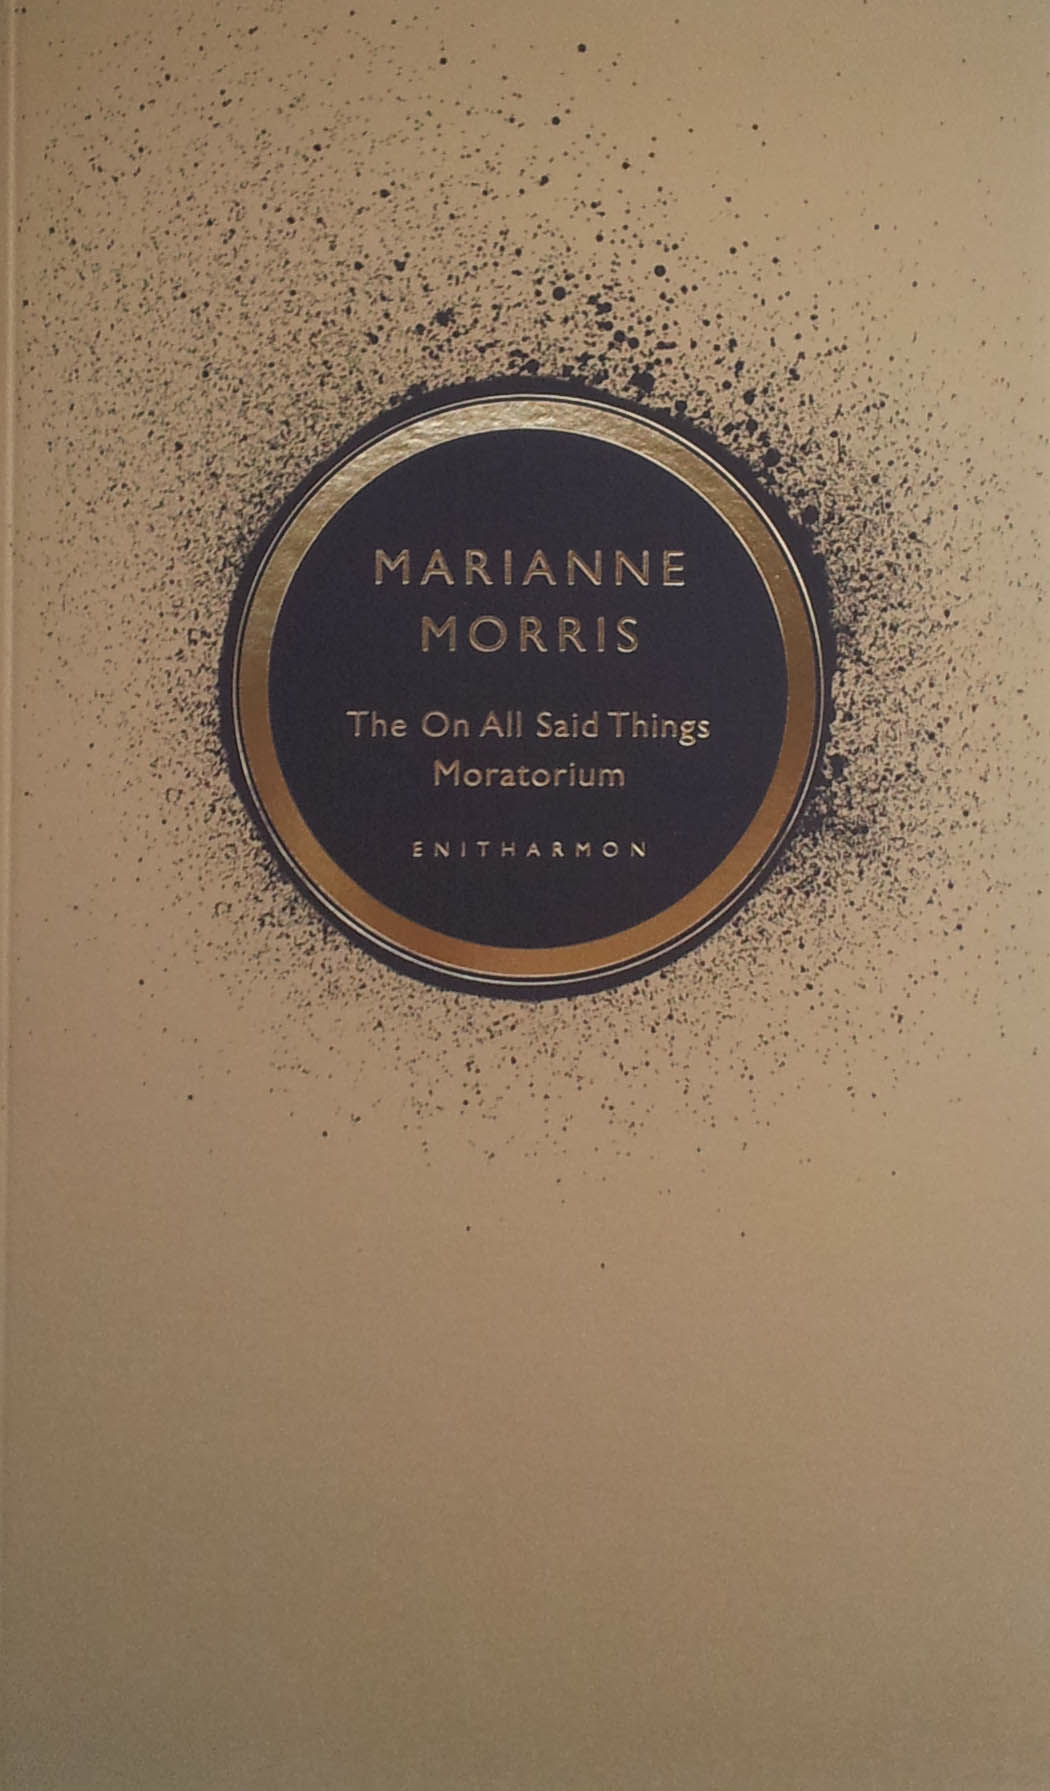 “THIS IS THE NEW LANGUAGE”: MARIANNE MORRIS’ THE ON ALL SAID THINGS MORATORIUM